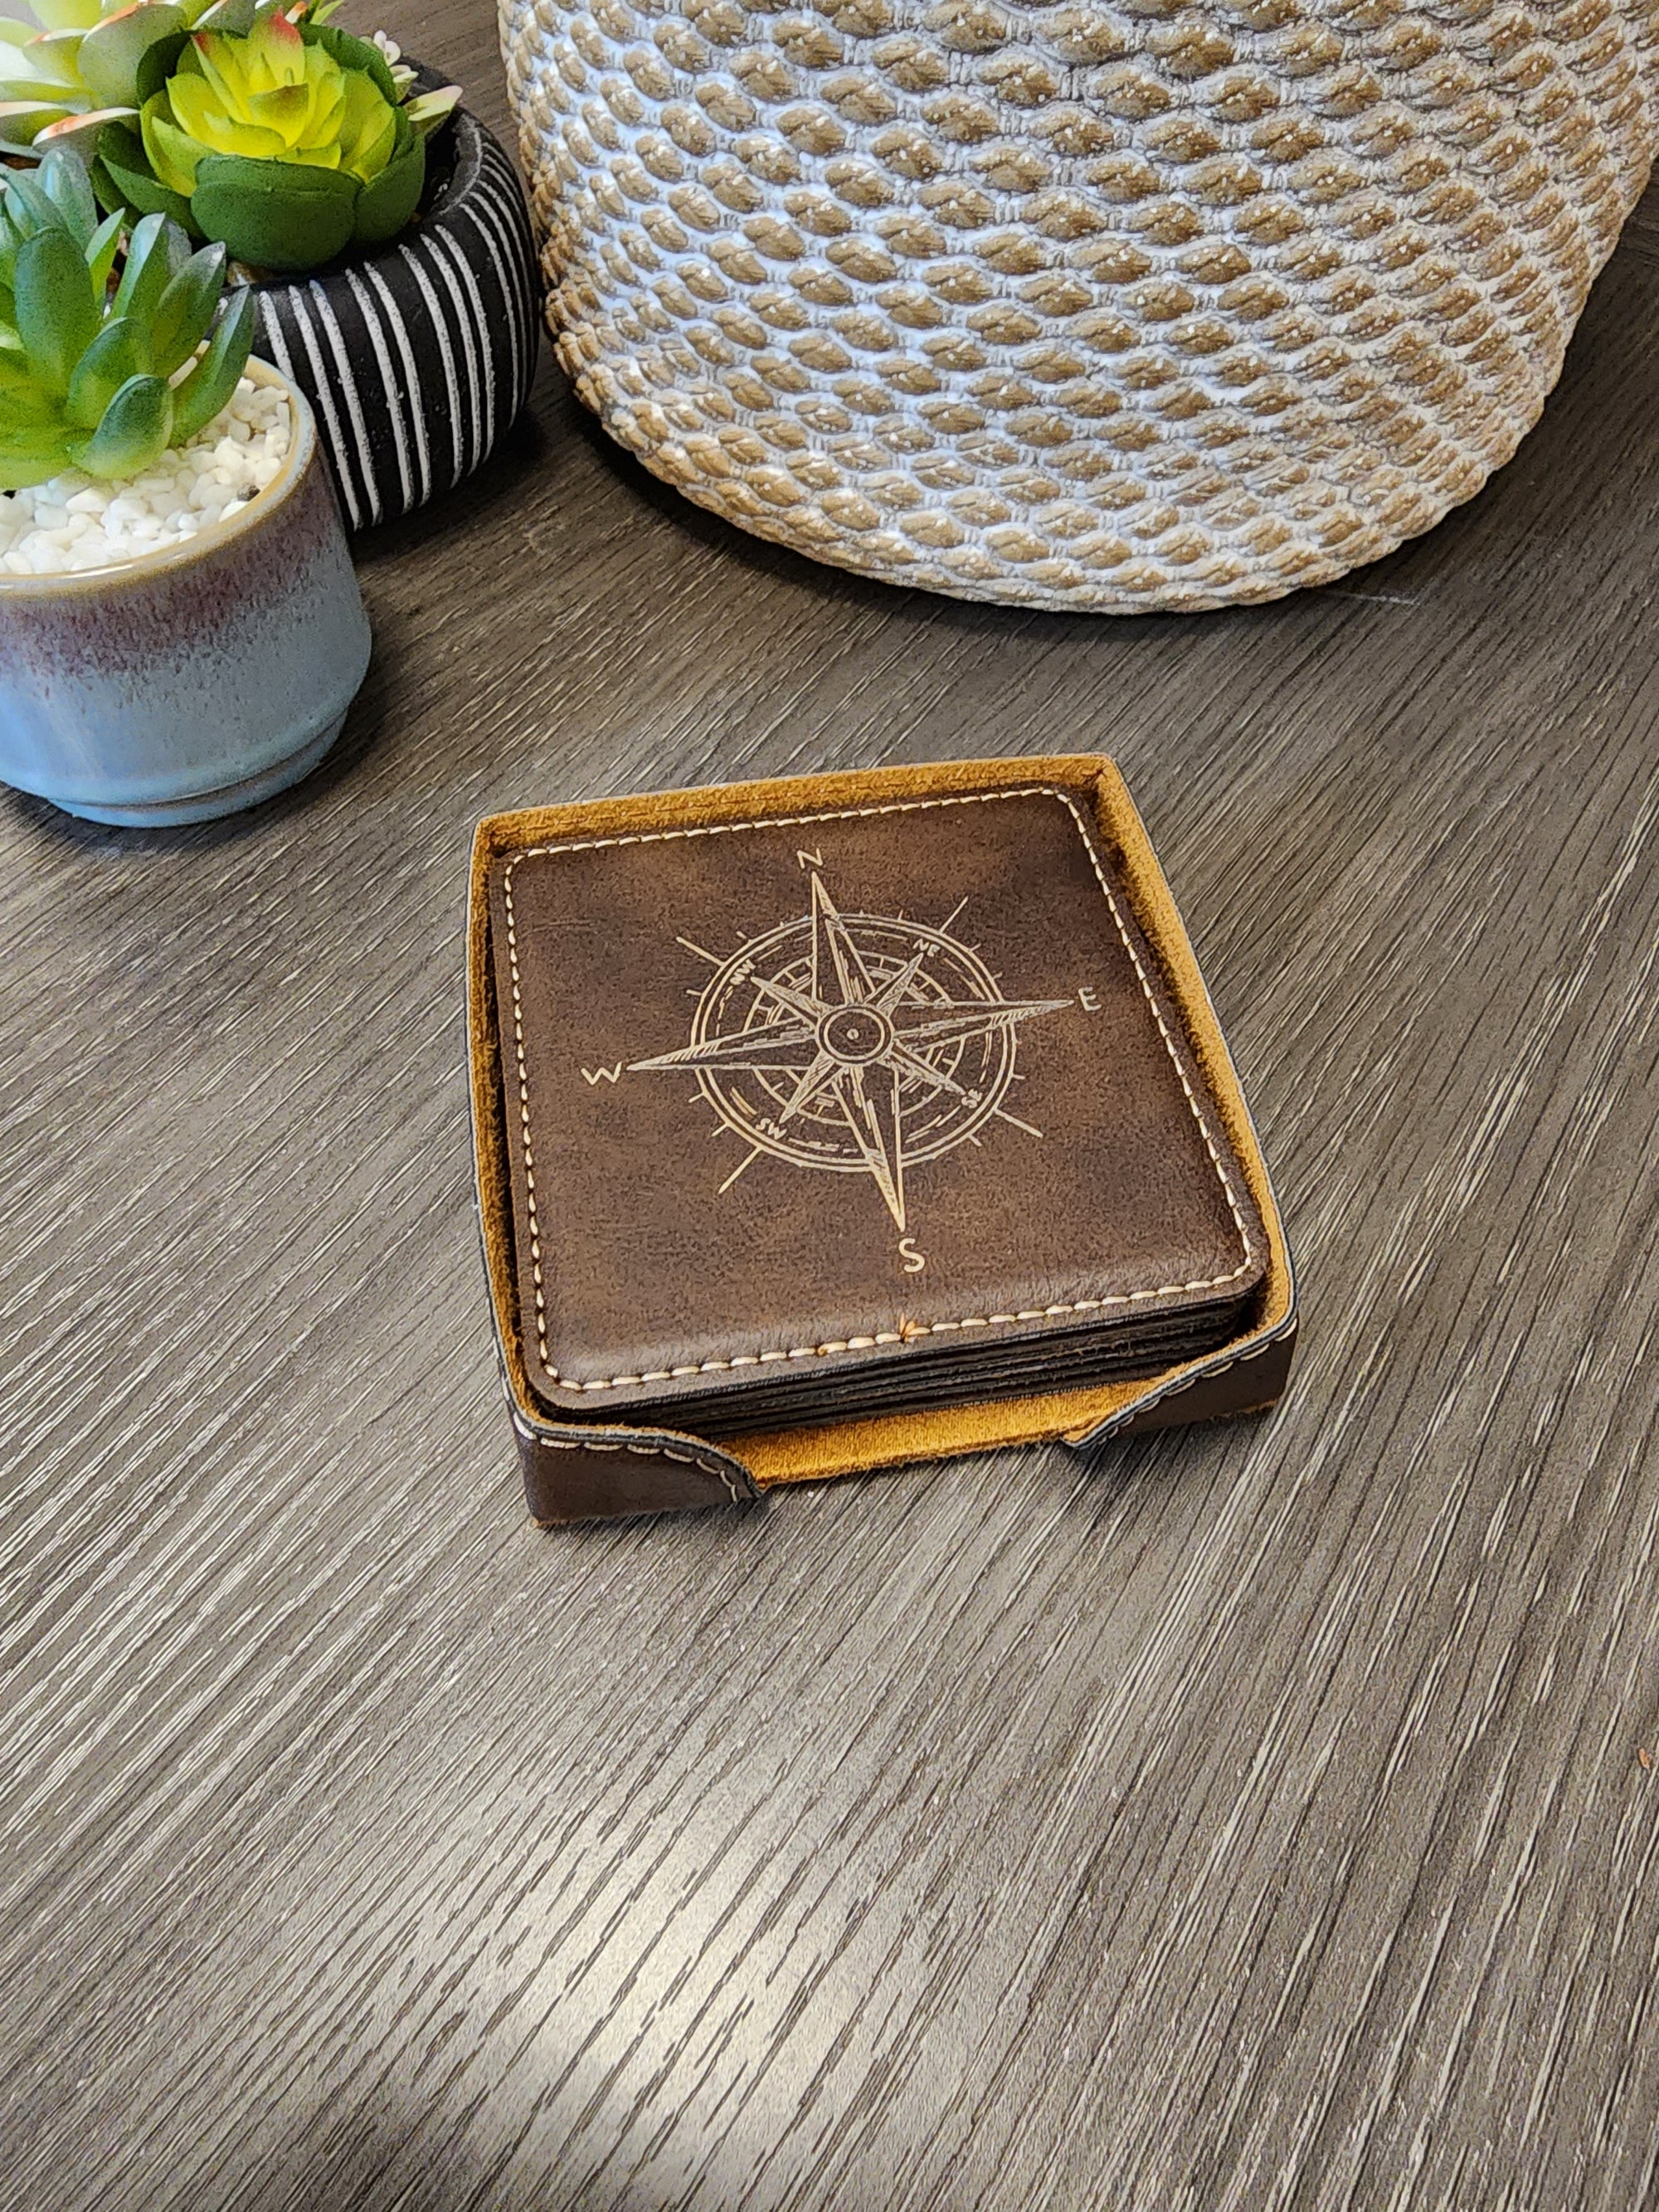 Nautical Compass Coasters, Sailing Gifts, Boating Coaster, Boat Coaster, Barware Coasters, Barroom, Set of 6 With Holder vrs 1